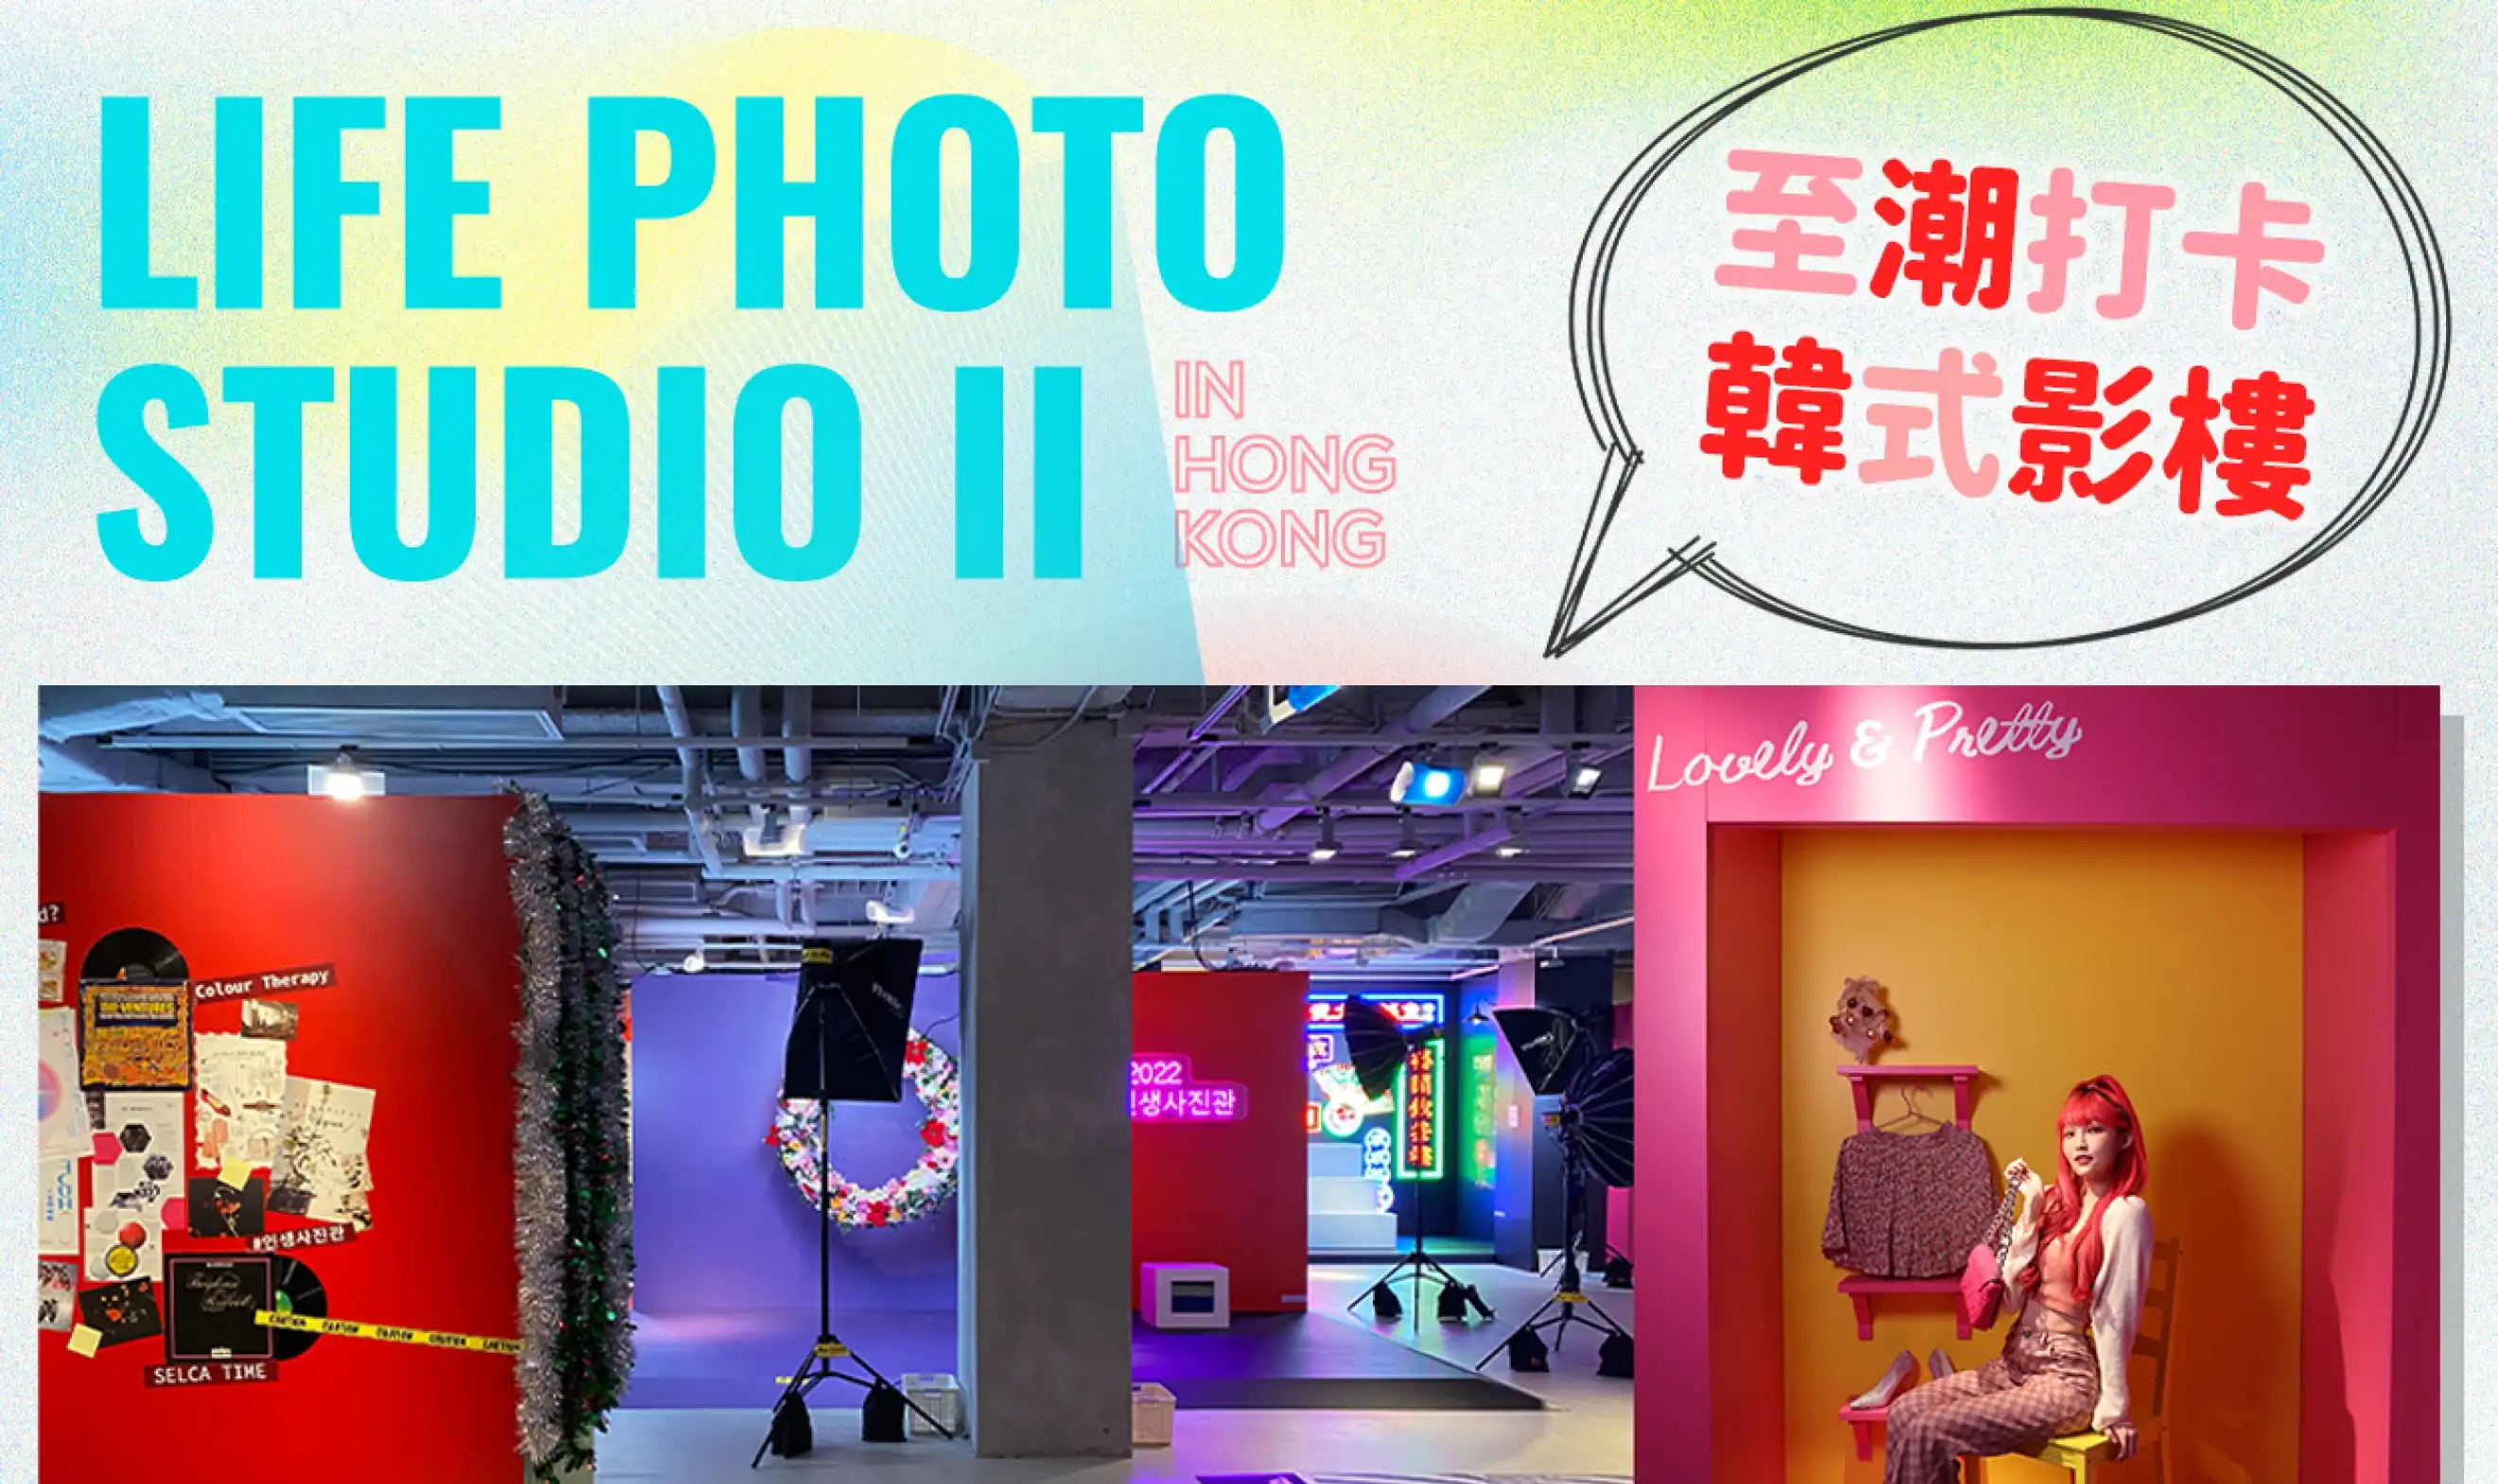 Life Photo Studio II creates different booths for a photo-taking 'amusement park